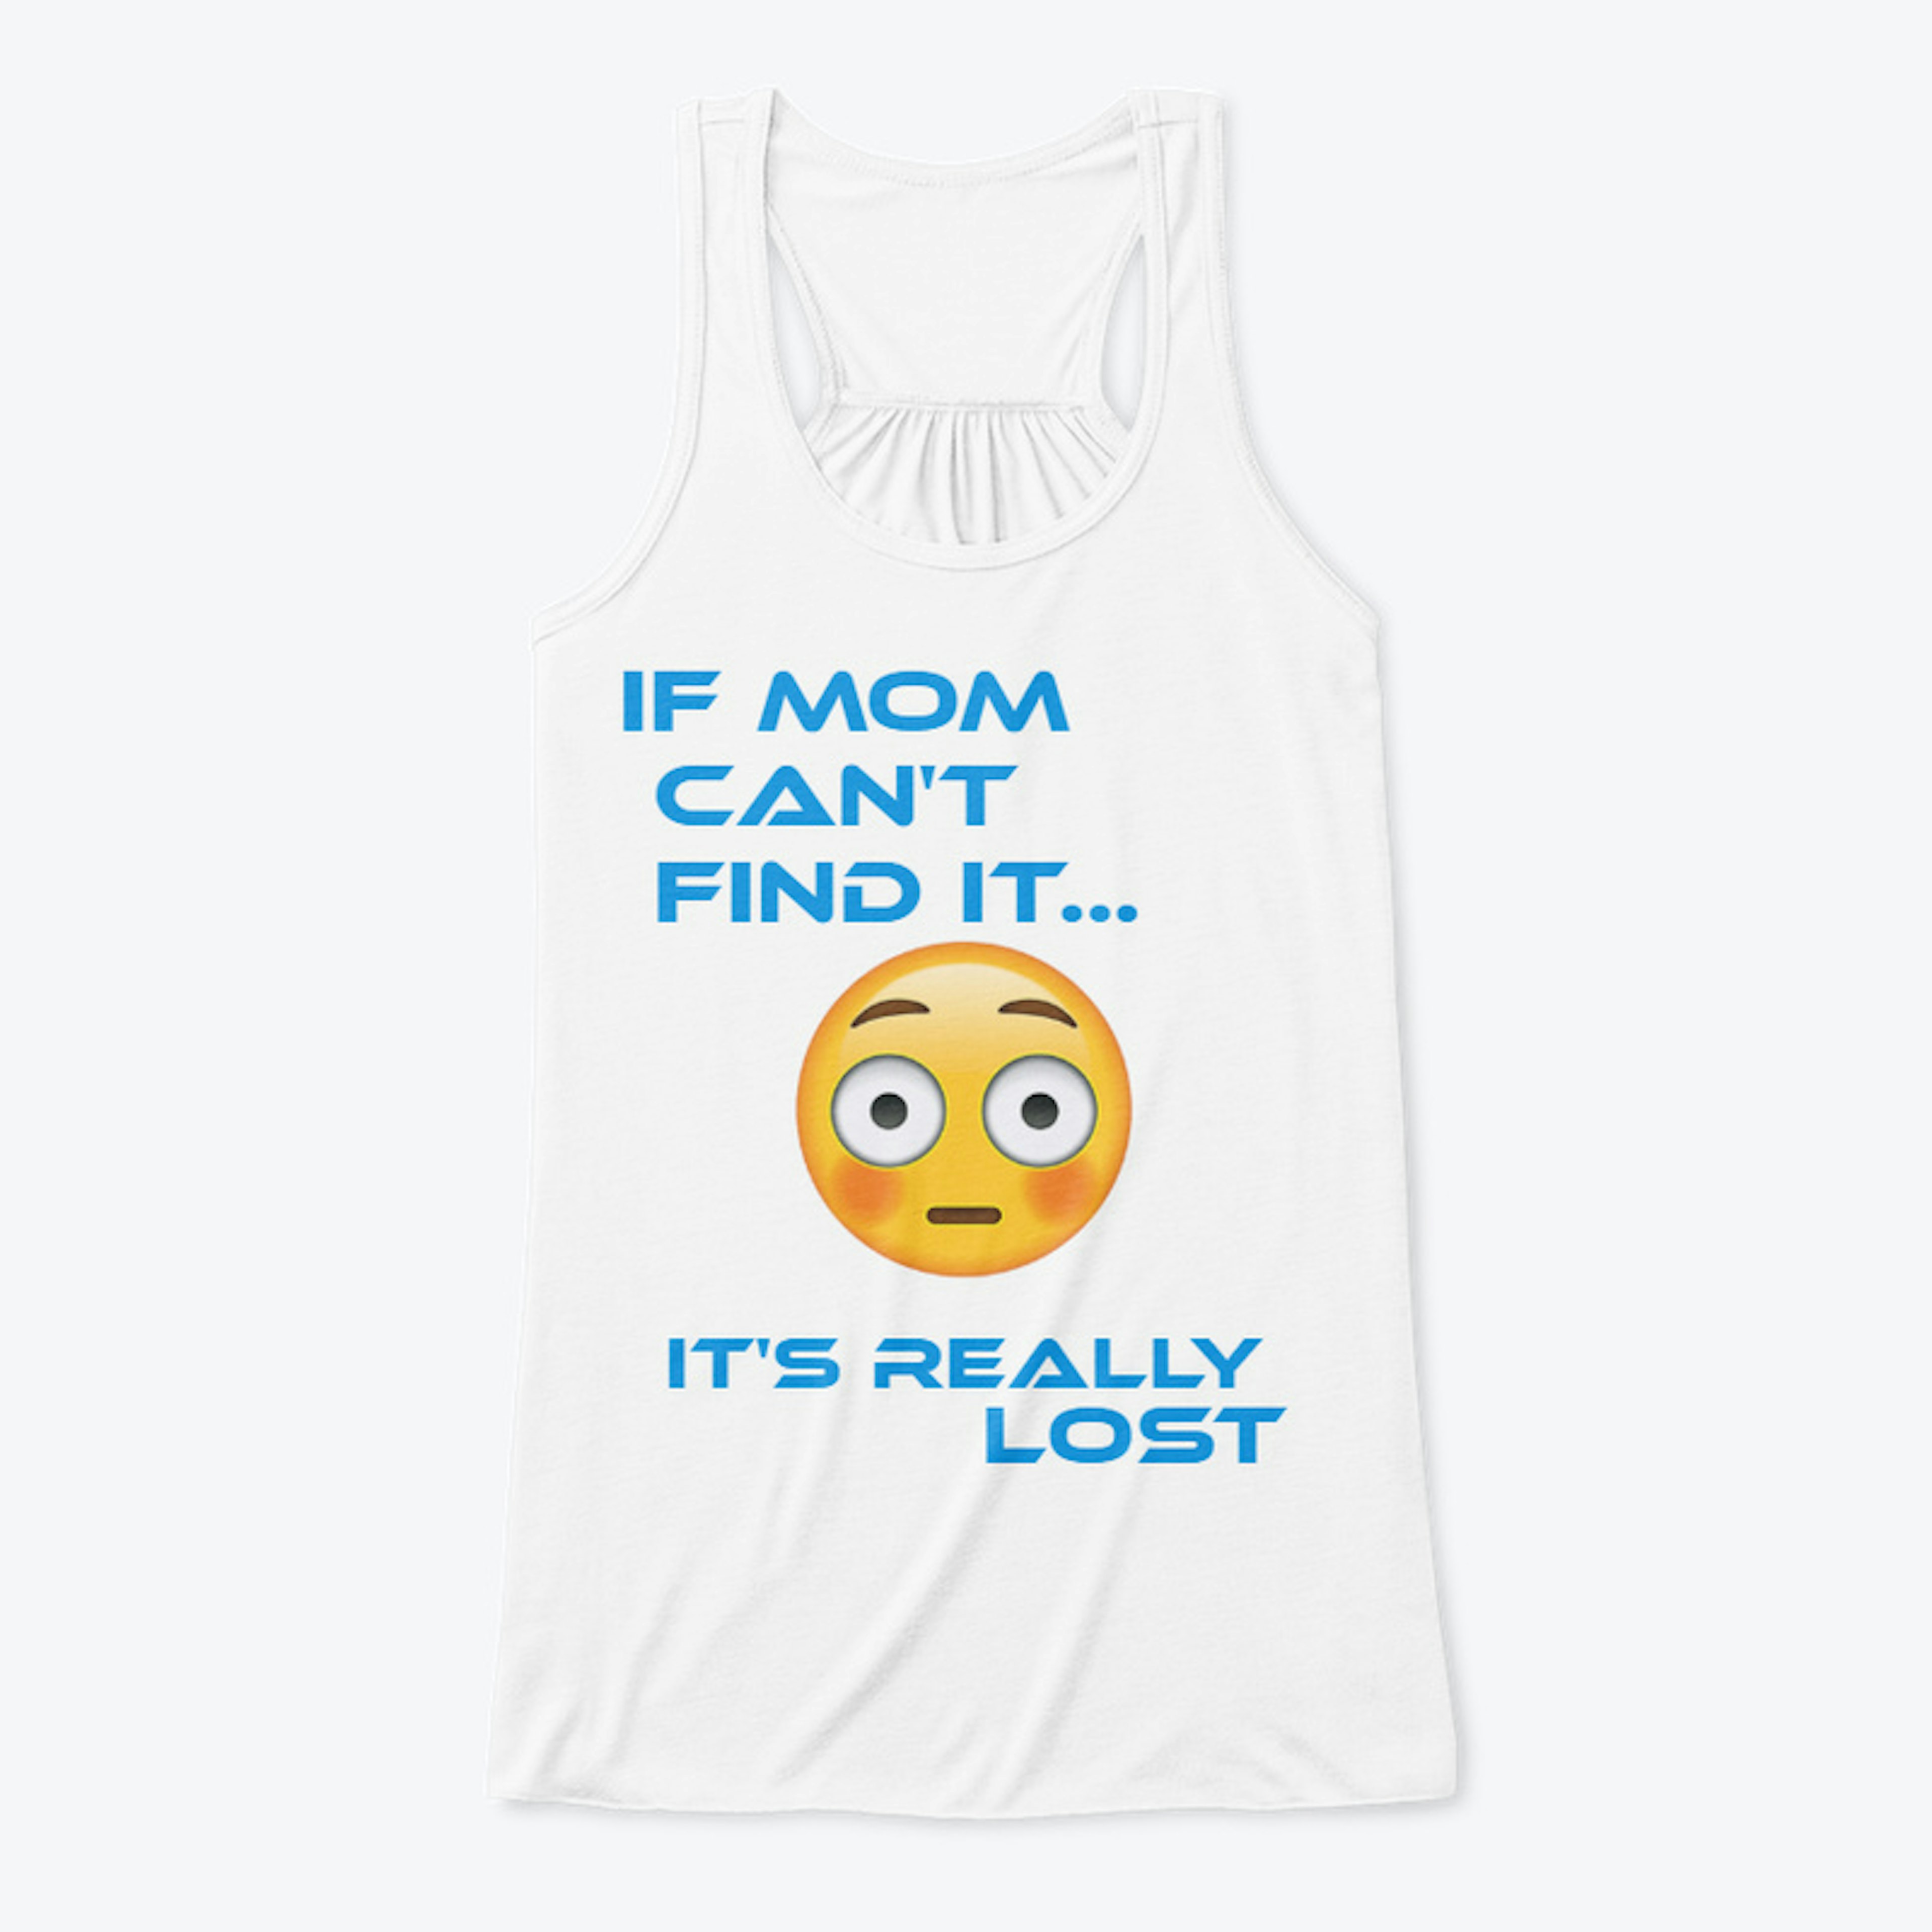 If Mom Can't Find It... It's Really Lost